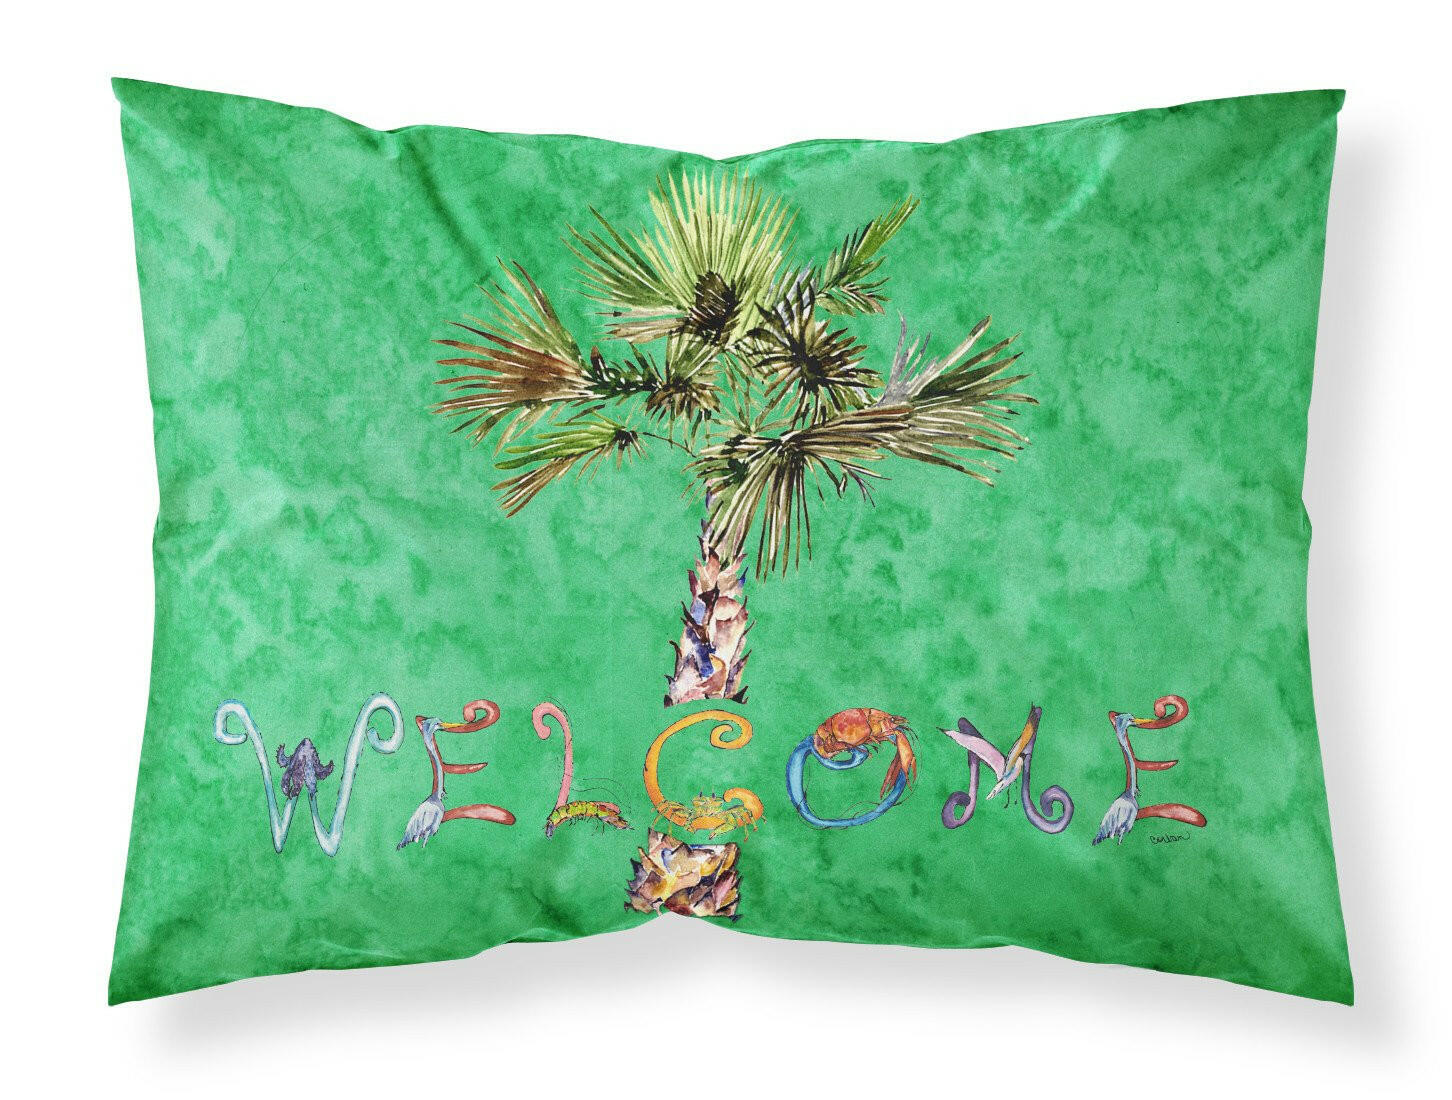 Welcome Palm Tree on Green Fabric Standard Pillowcase 8710PILLOWCASE by Caroline's Treasures